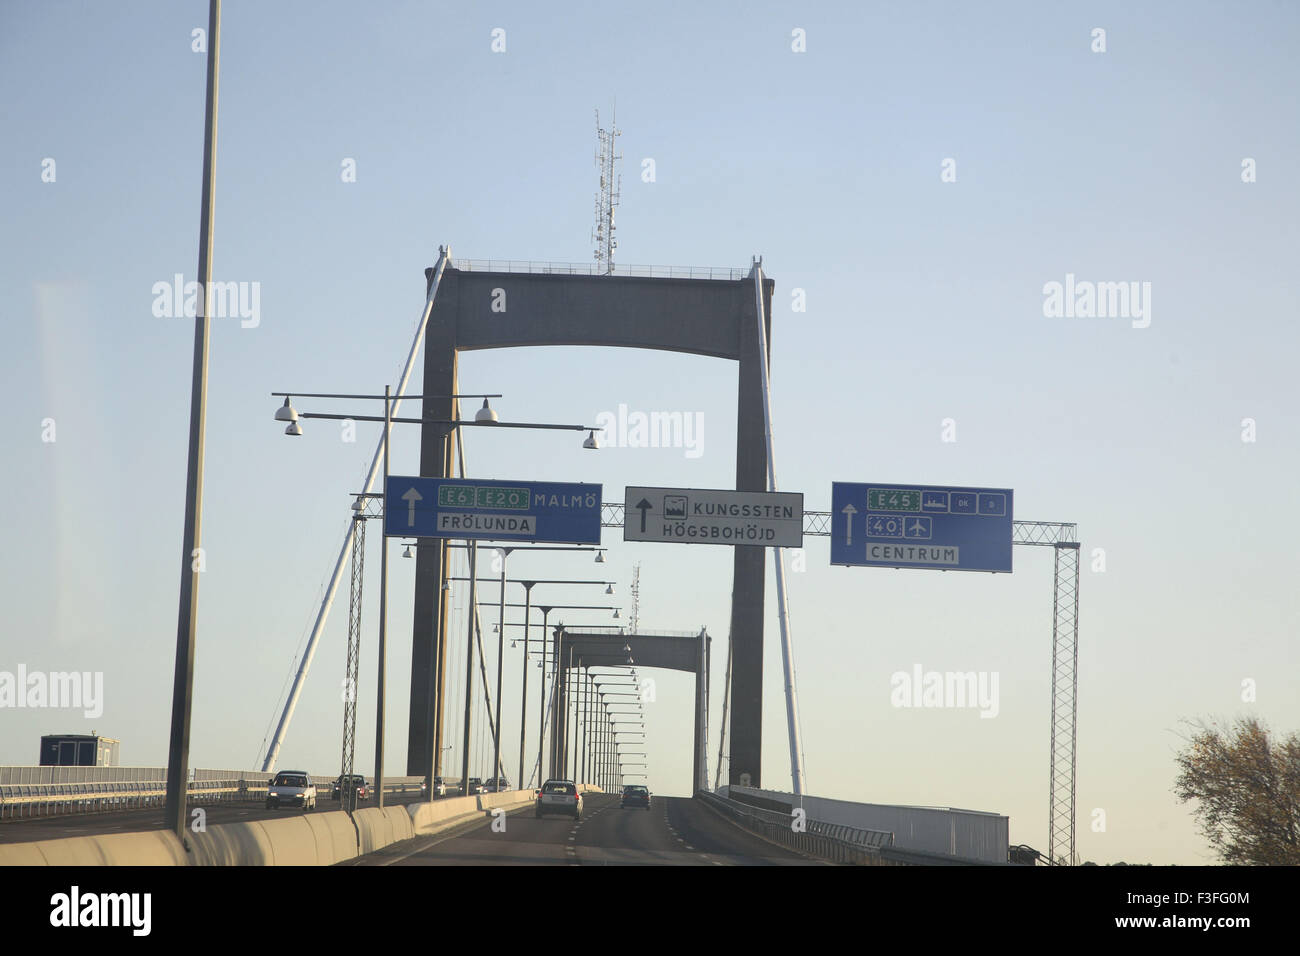 Road signs showing highways E 6 ; E 20 ; E 45 ; Sweden Stock Photo